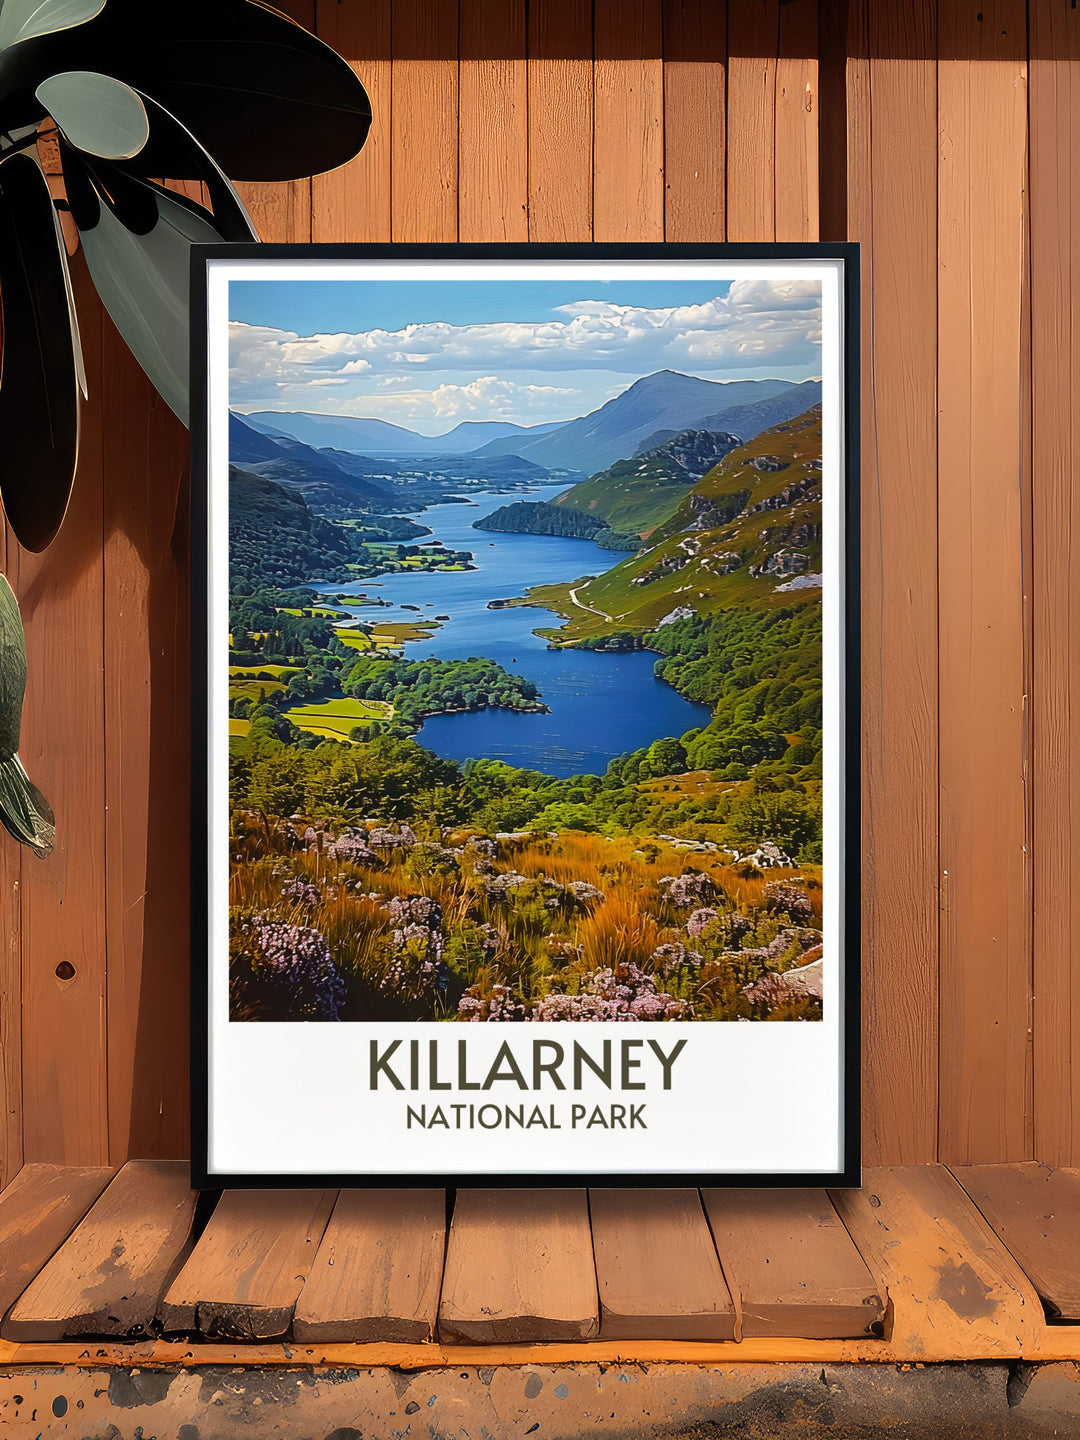 Irish wall art emphasizing the serene and lush settings of the national park, suitable for offices and homes alike